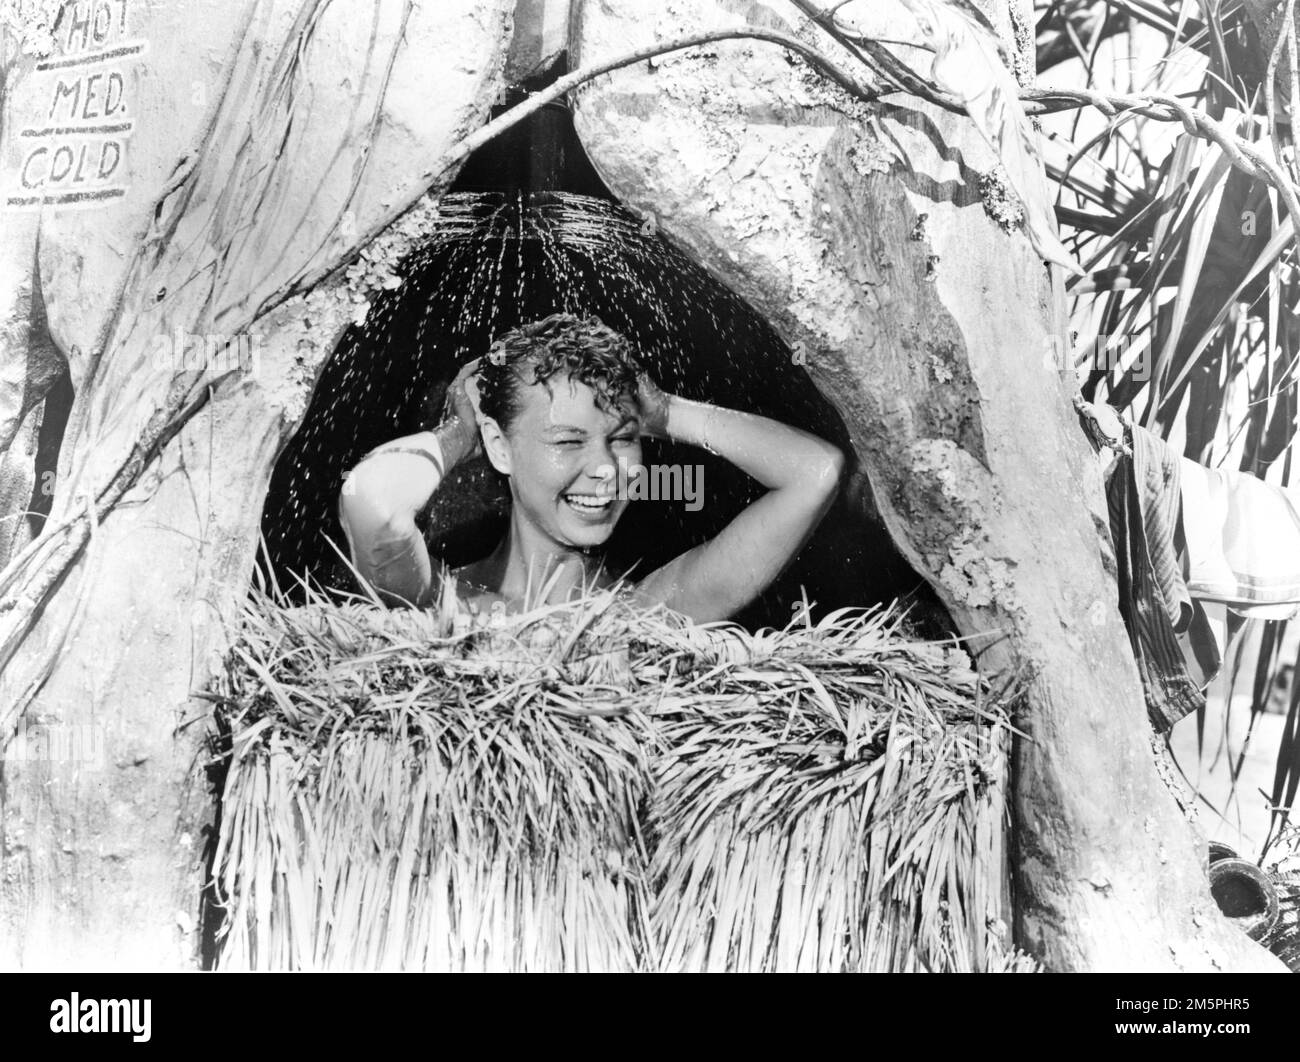 MITZI GAYNOR in RODGERS and HAMMERSTEINS SOUTH PACIFIC 1958 Regisseur JOSHUA LOGAN Musik Richard Rodgers Lyrics Oscar Hammerstein II Based on Tales of the South Pacific by James A. Michener Rodgers and Hammerstein Productions / Magna Theatre Corporation / Twentieth Century Fox Stockfoto